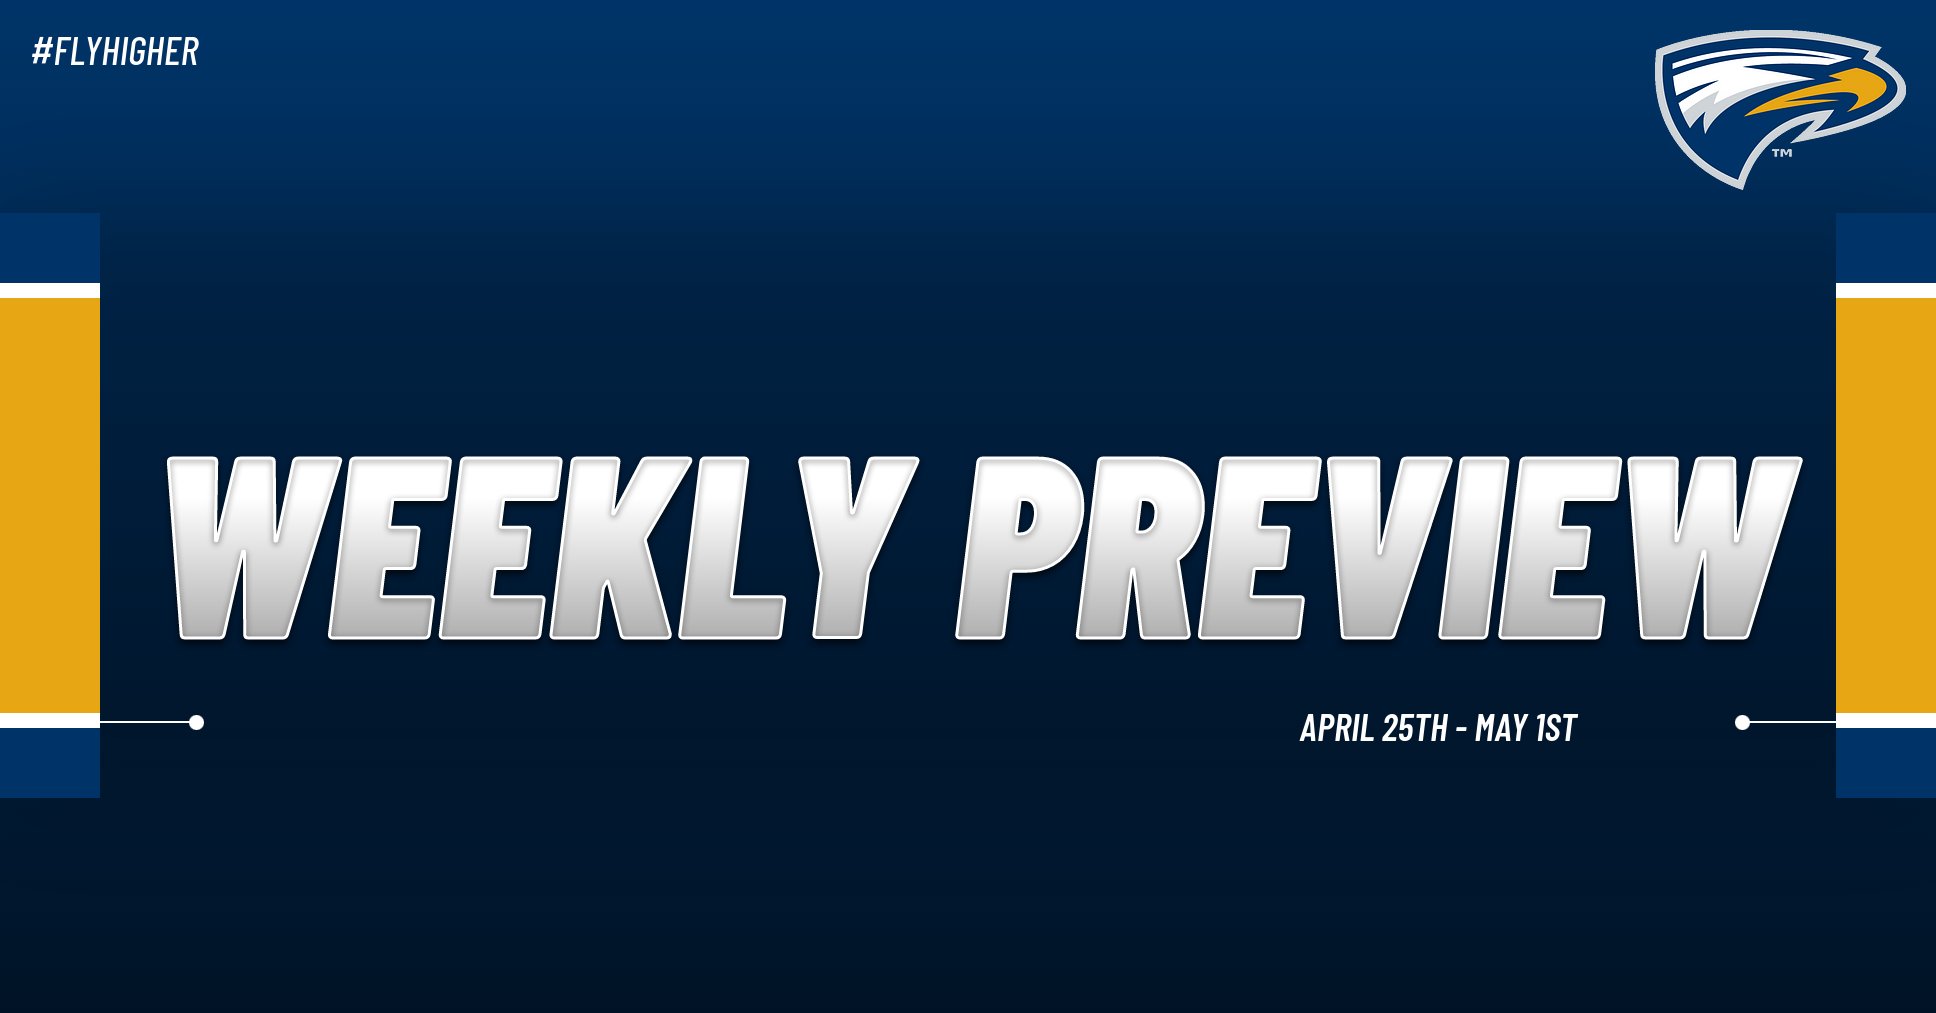 Emory Athletics Weekly Preview: April 25th - May 1st